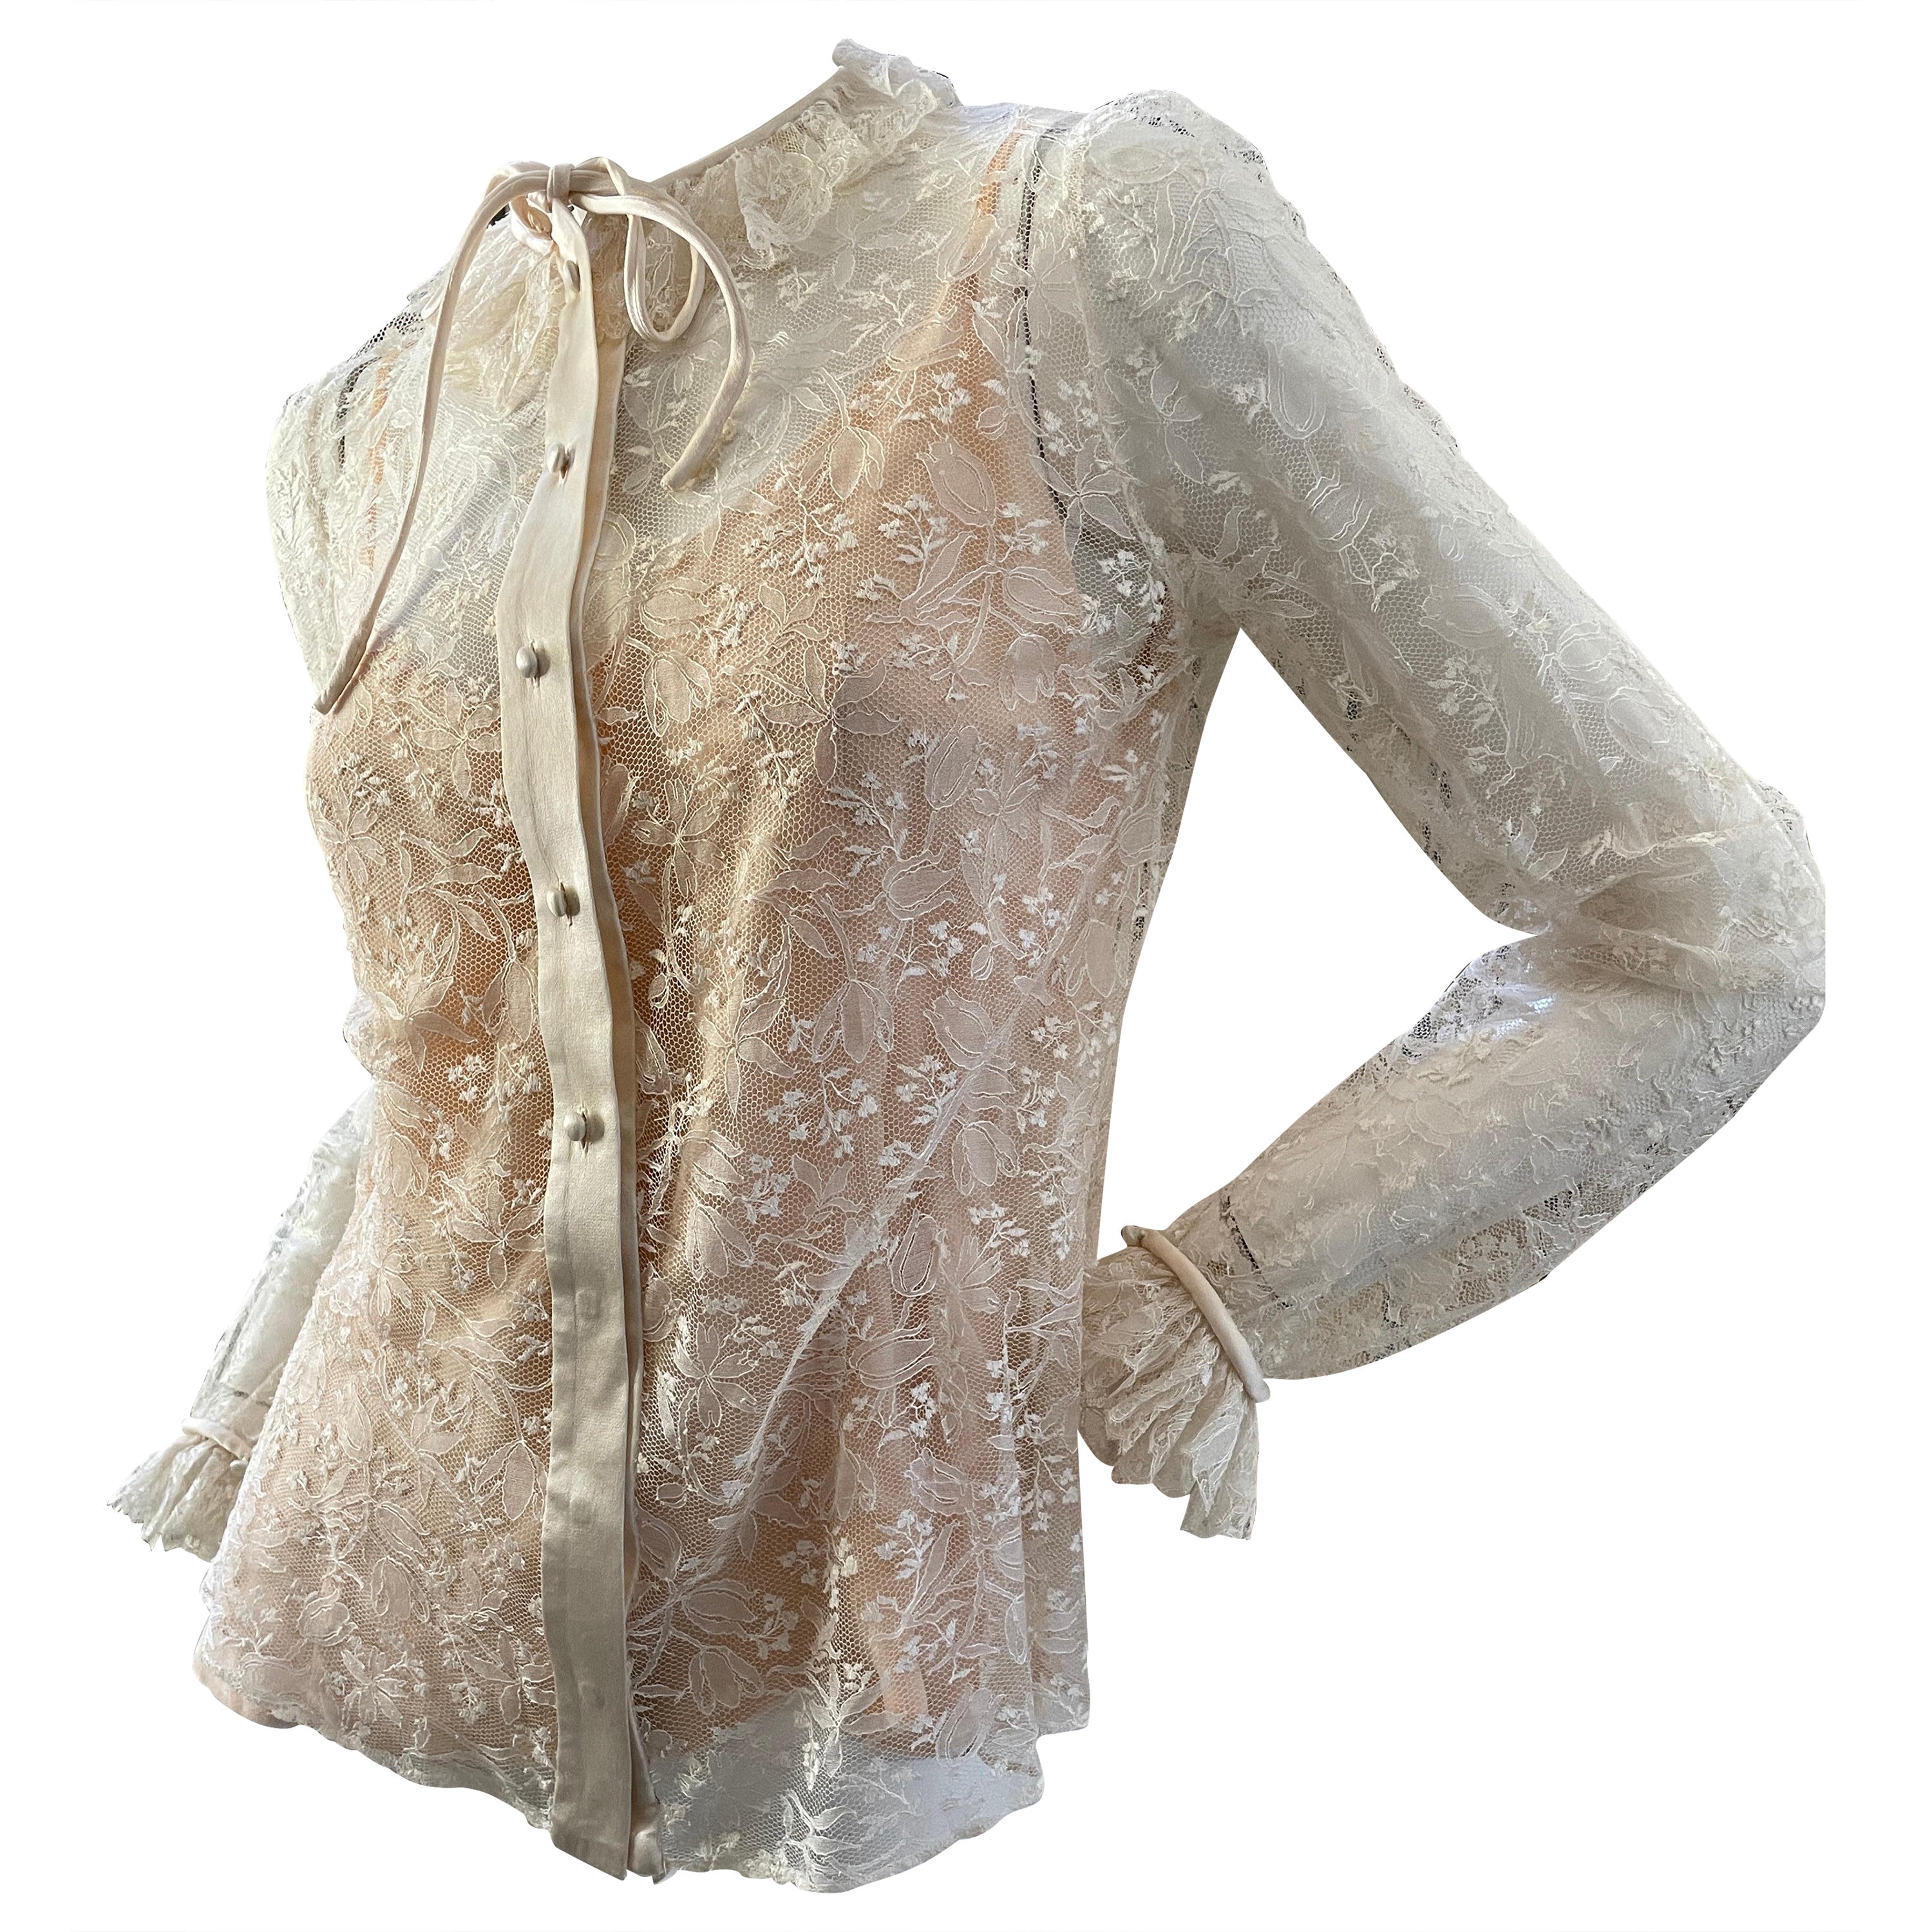 Jean-Louis Couture 1960's Sheer Lace Blouse with Ruffle Collar and Cuffs For Sale